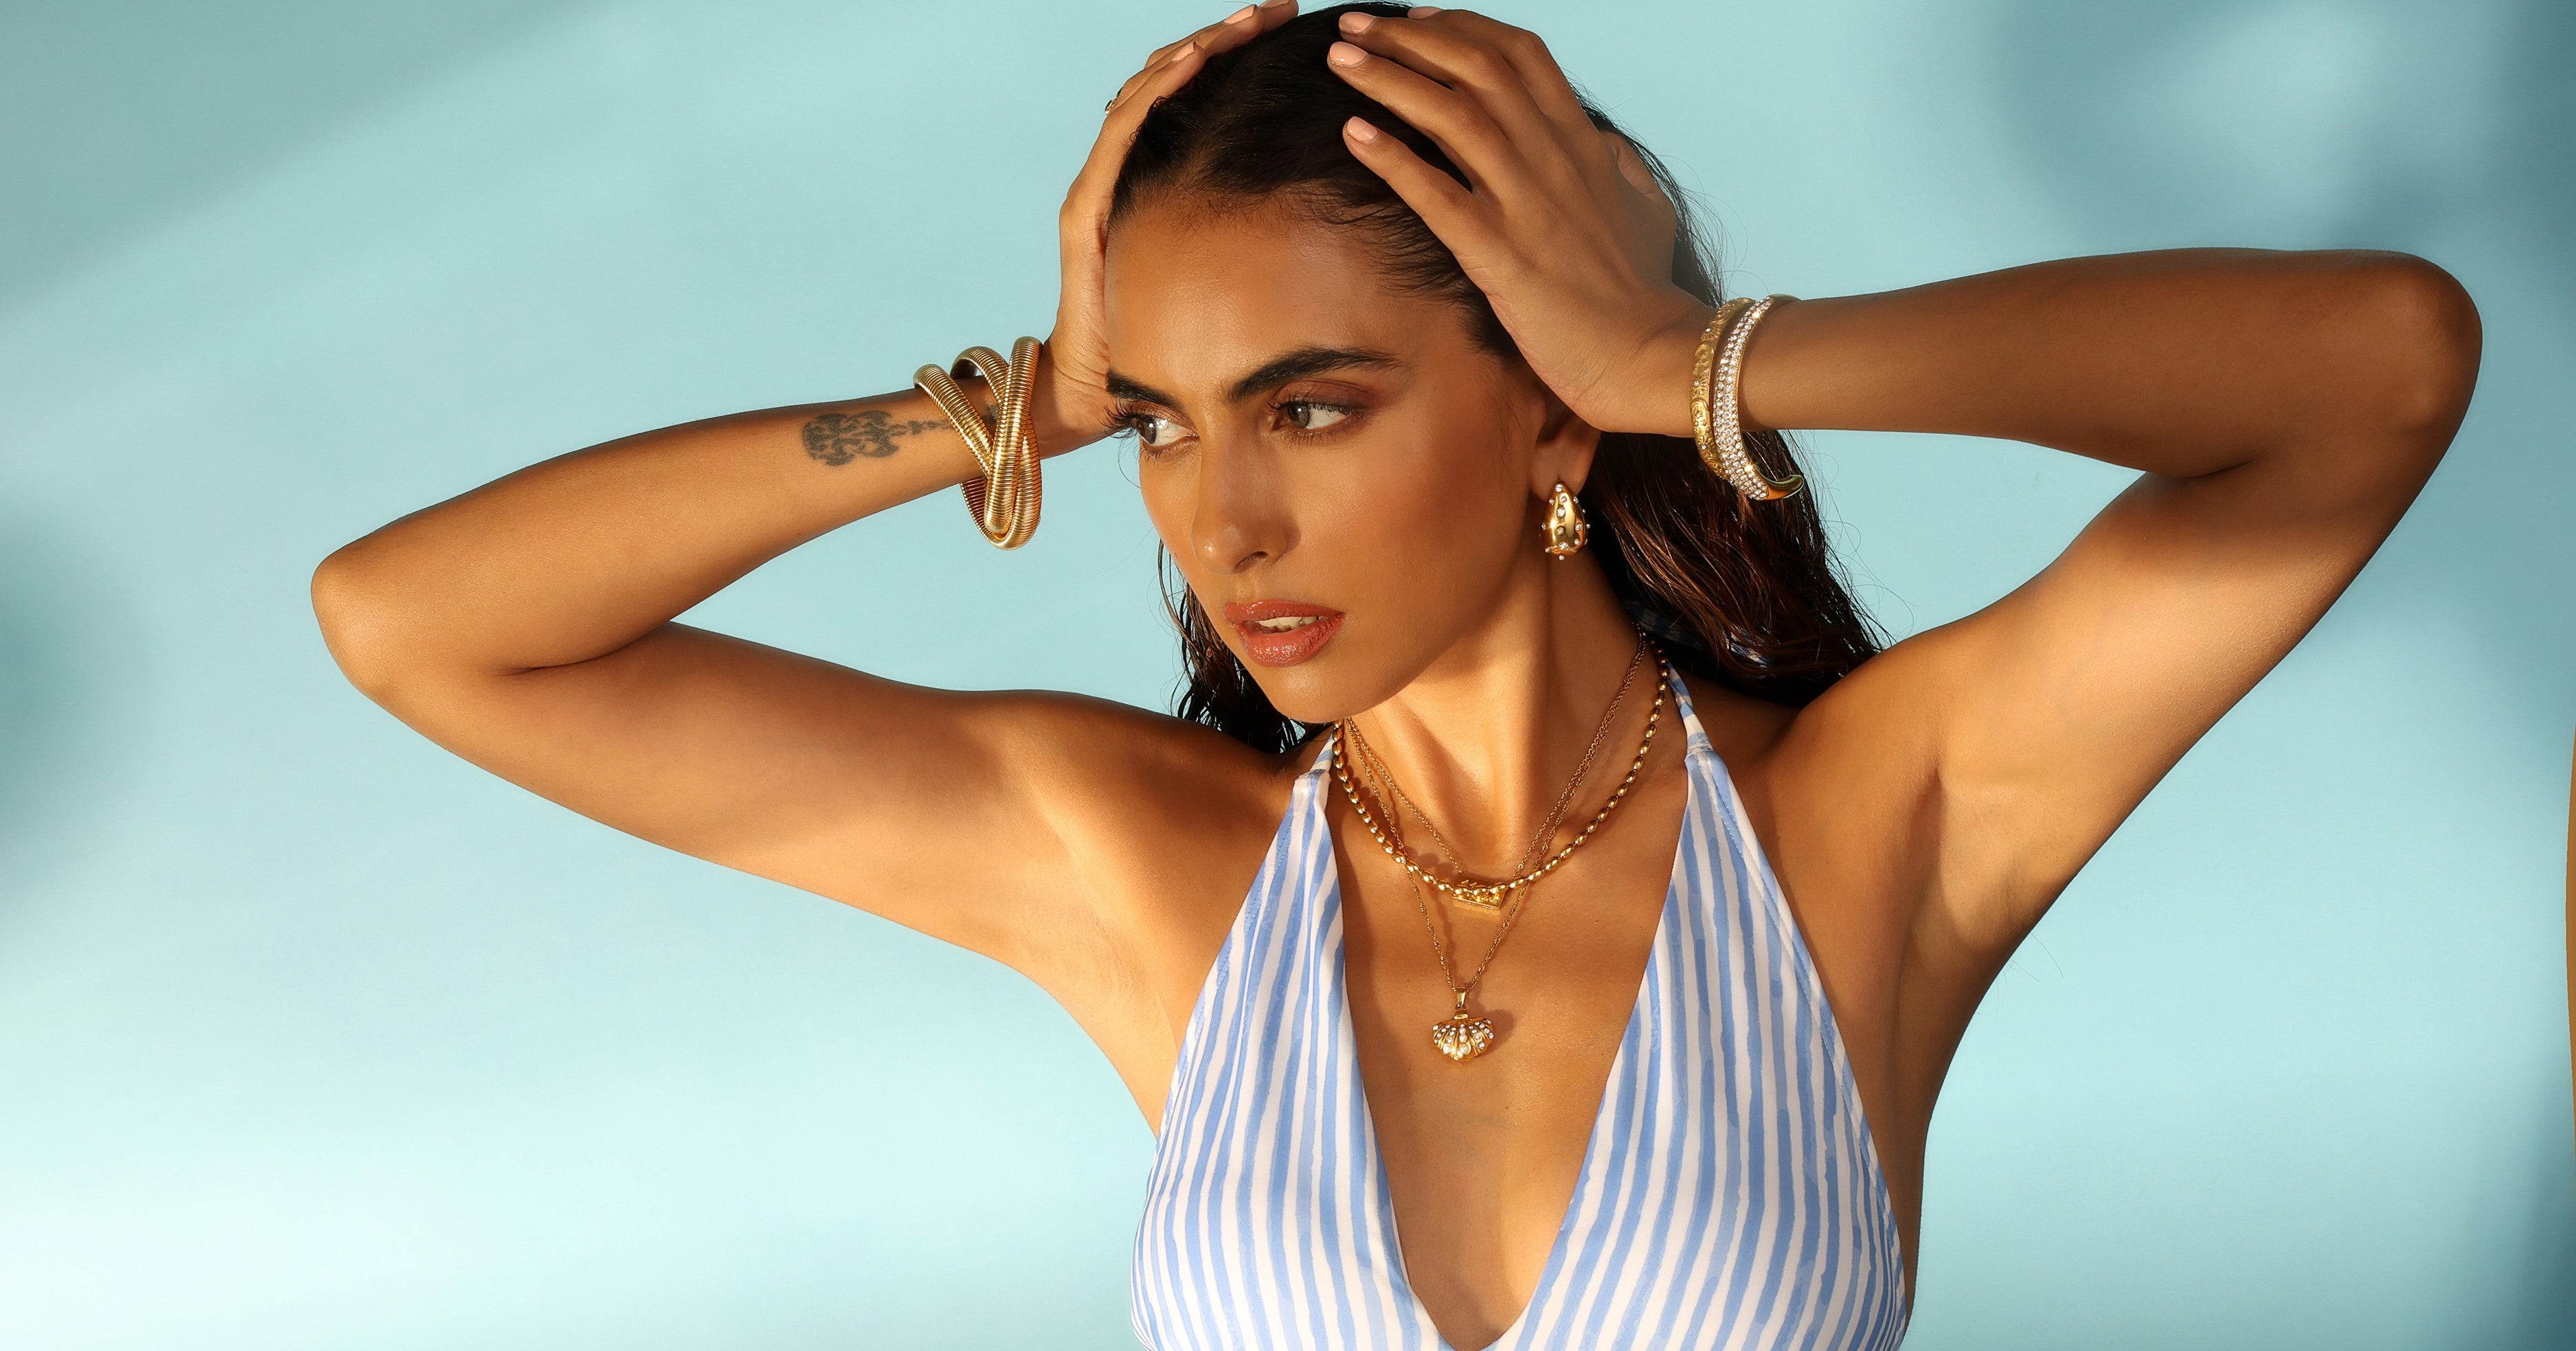 Elevate Your everyday with Exquisite WATERPROOF Jewellery Pieces. Own the finest waterproof, anti-tarnish, 18k gold plated jewellery available online.